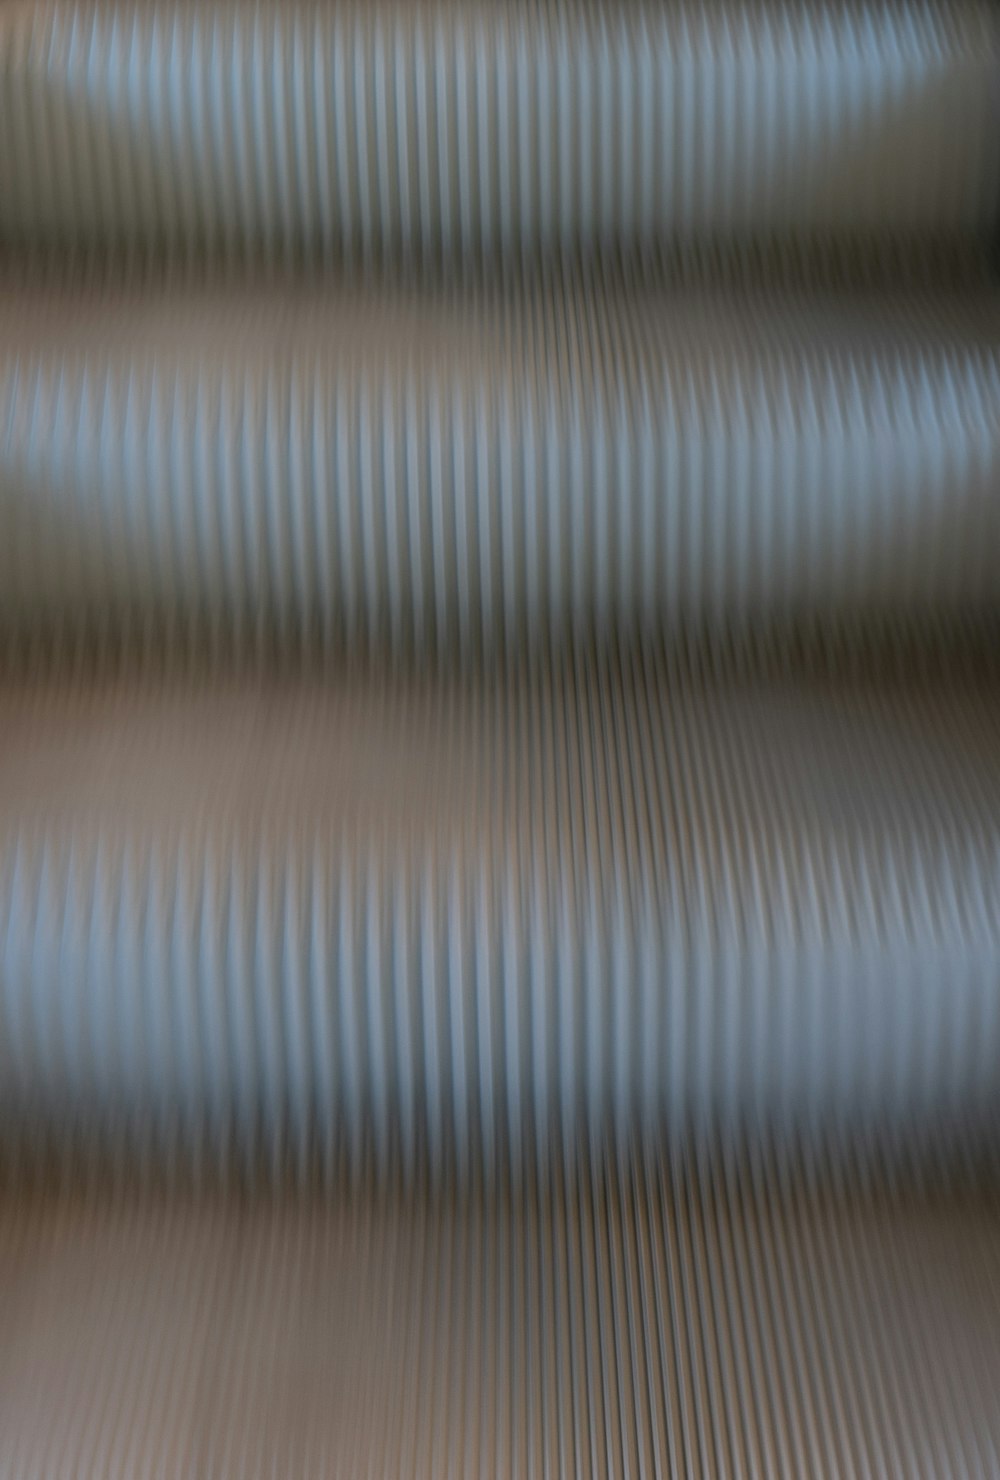 a blurry image of a set of stairs